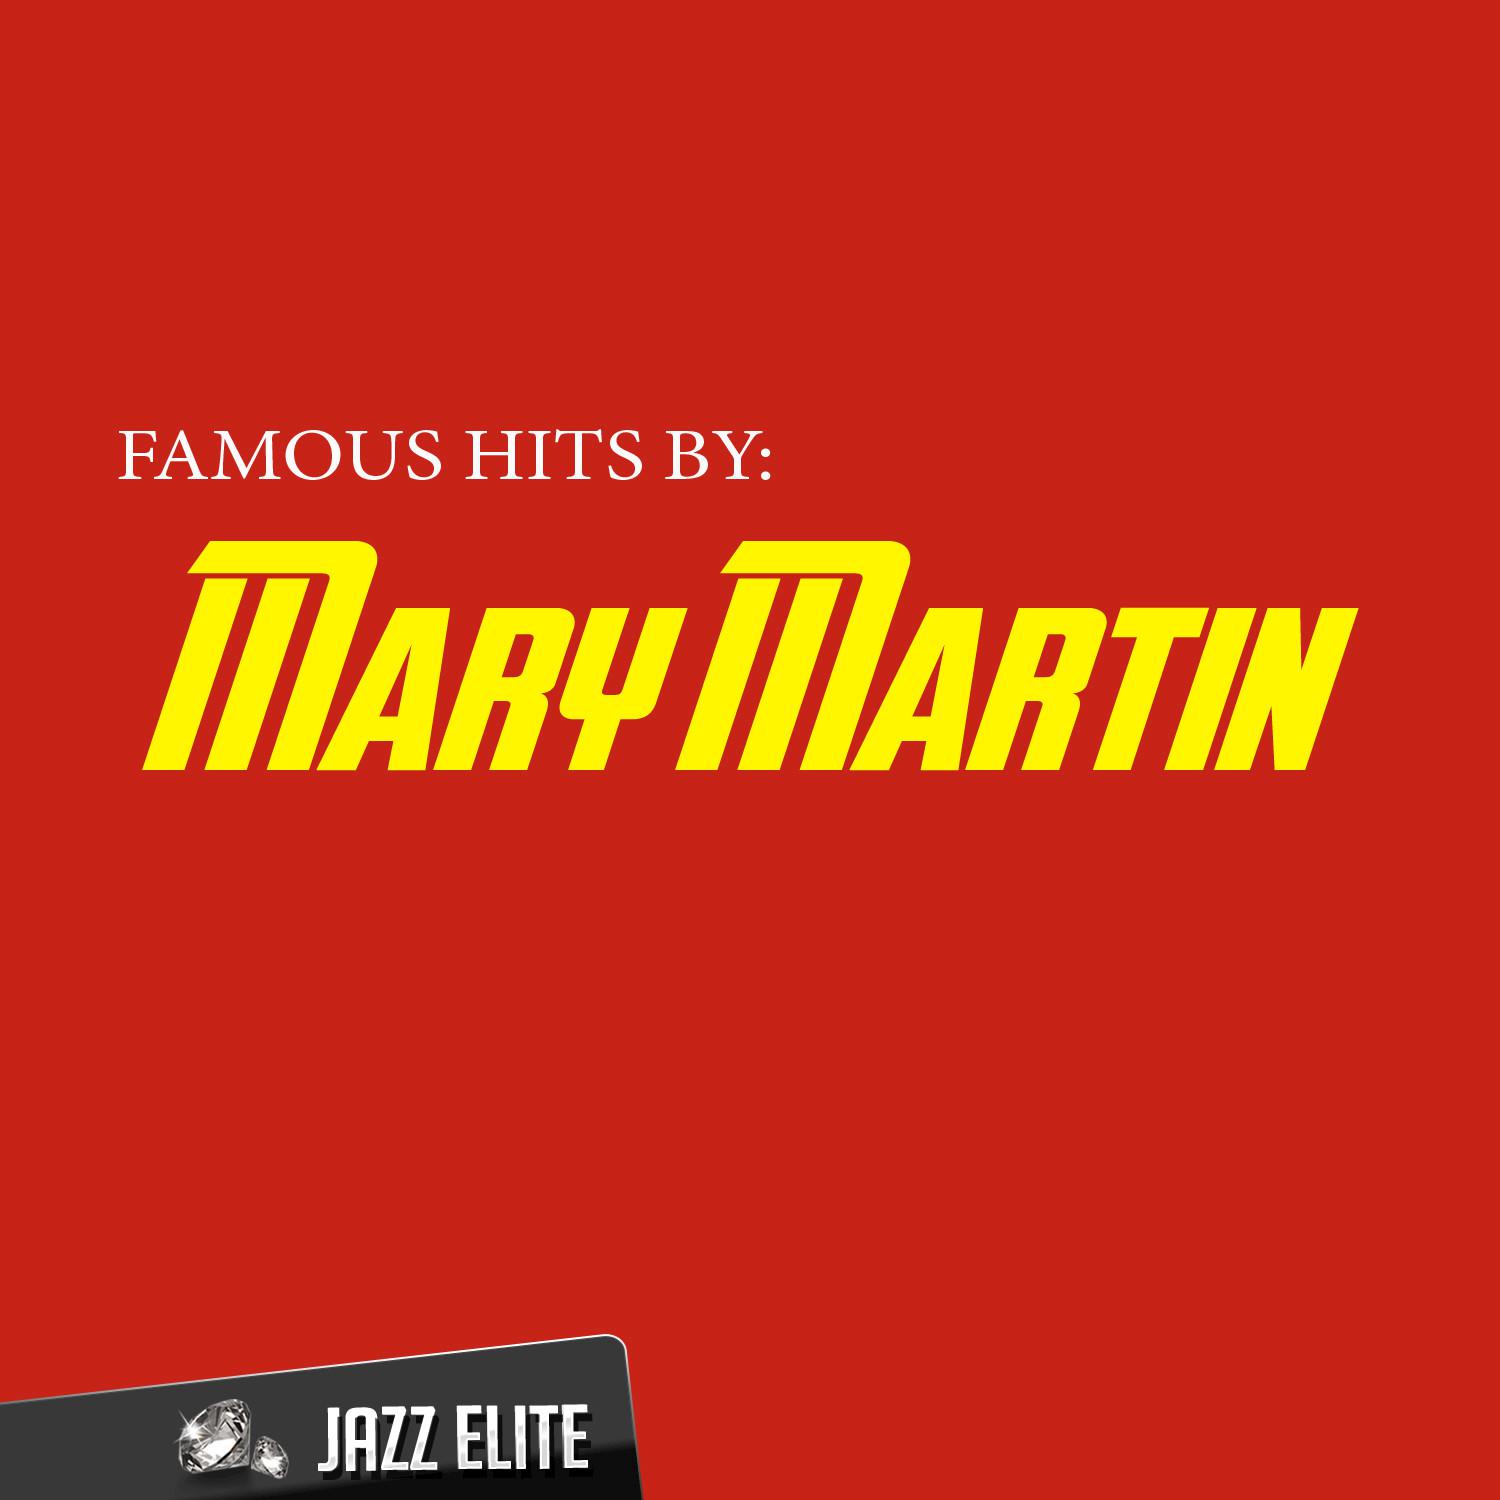 Famous Hits by Mary Martin